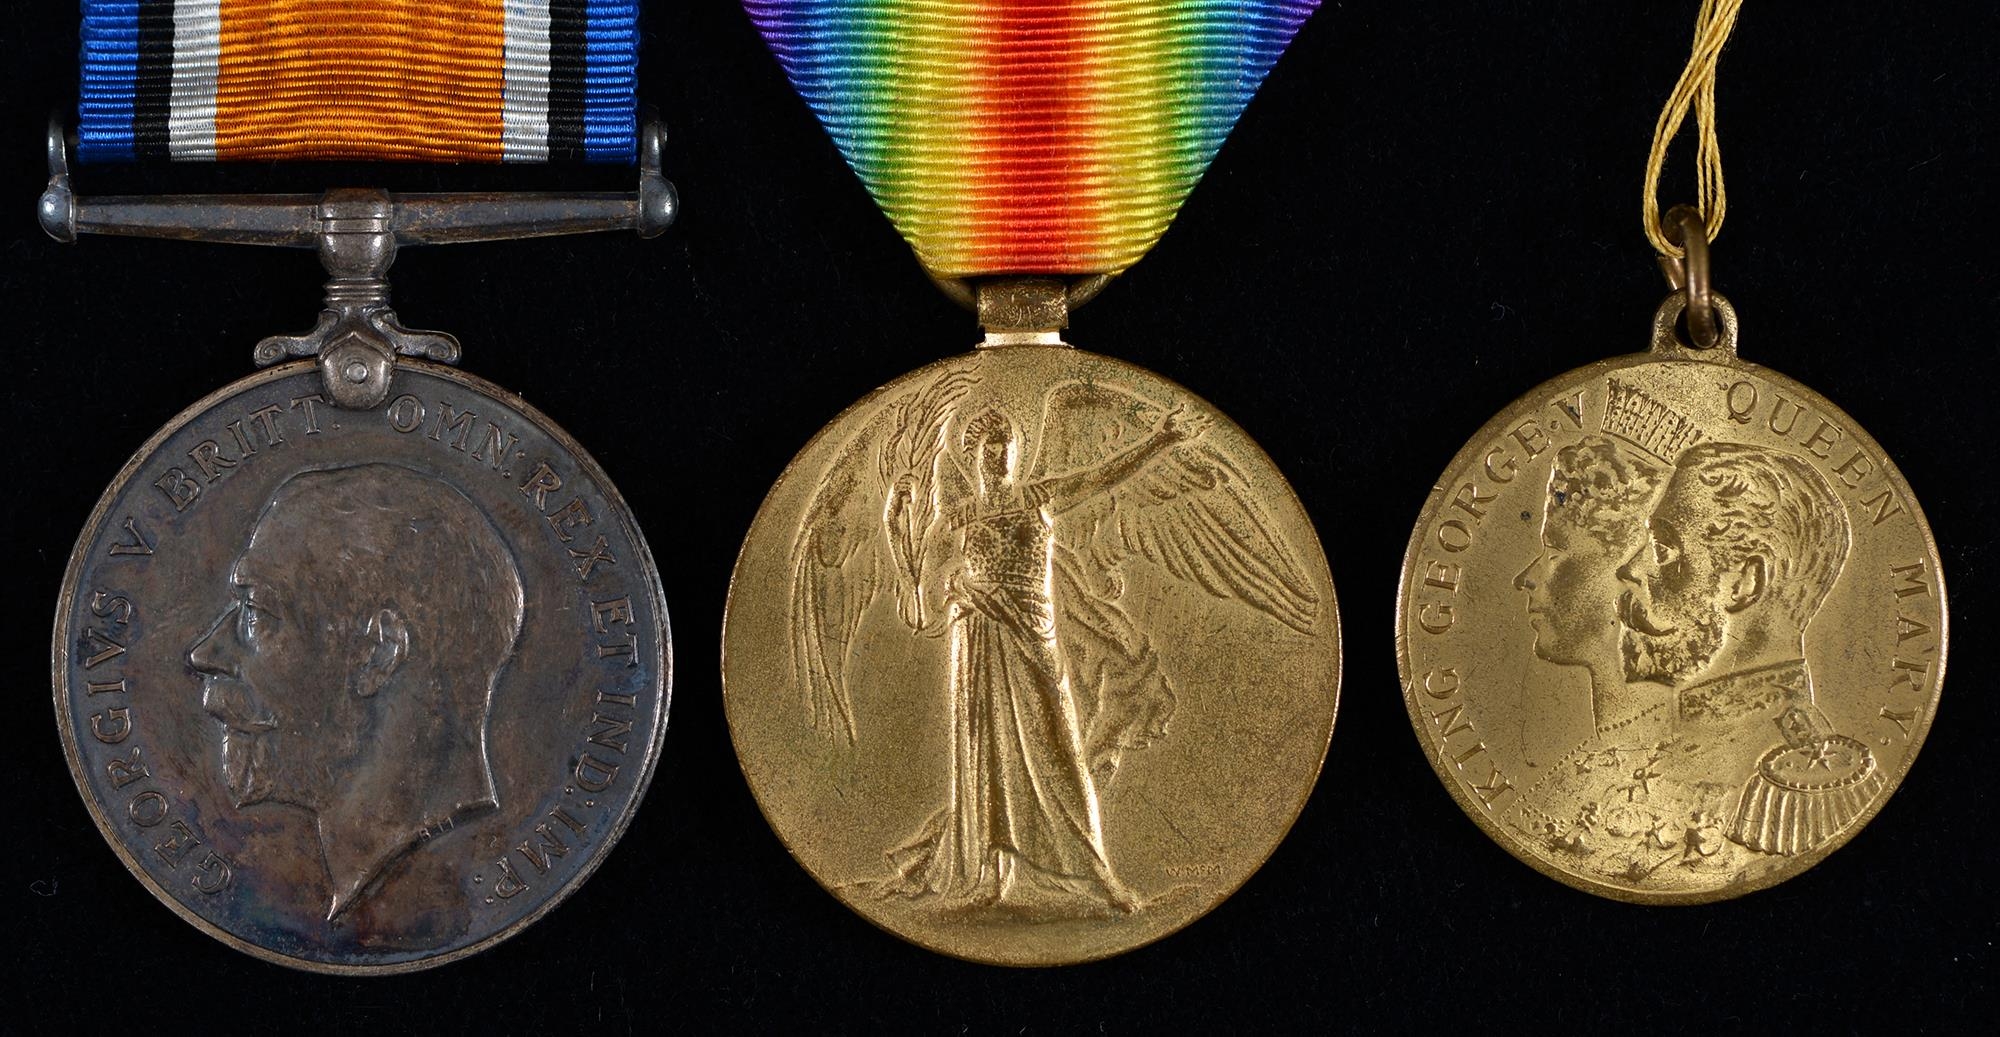 WWI pair, British War Medal and Victory Medal 78856 Pte C H Evans Durh L I and a giltmetal